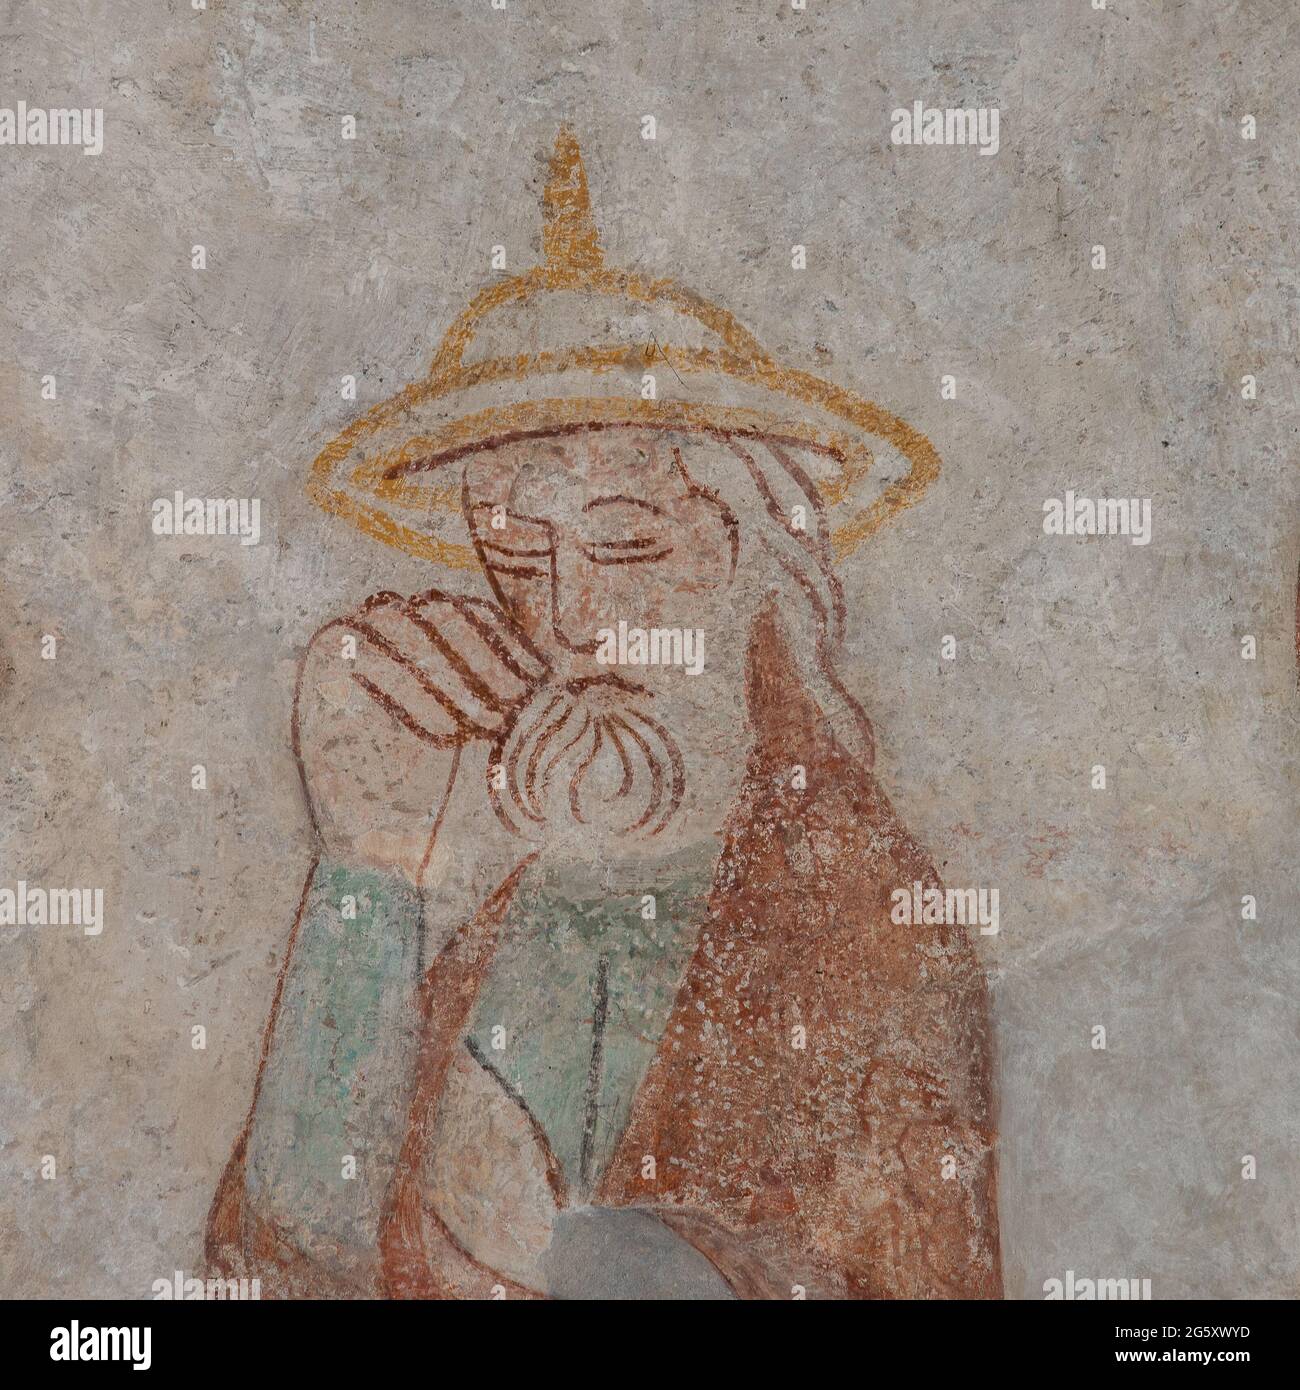 portrait of Saint Joseph, the husband of Mary, in a jewish hat, an ancient mural in Skibby church in Denmark, June 28, 2021 Stock Photo